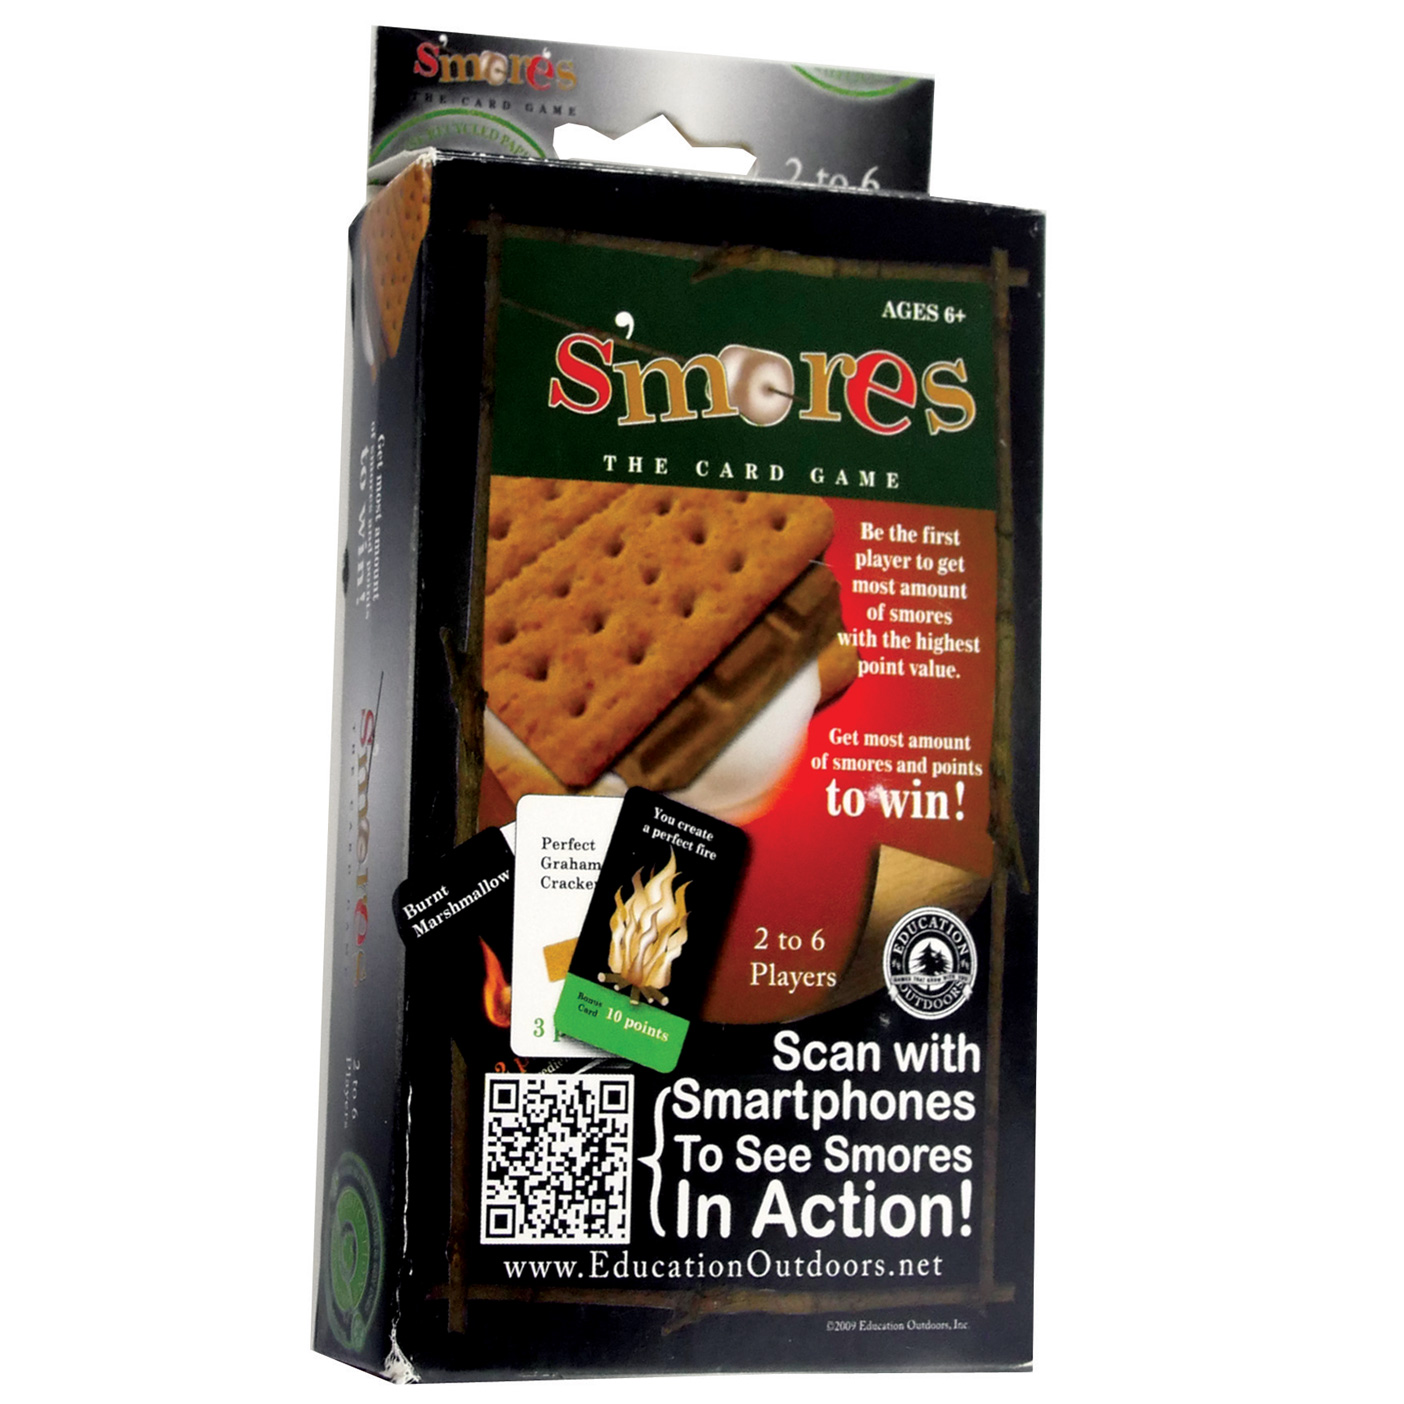 S-MORES CARD GAME